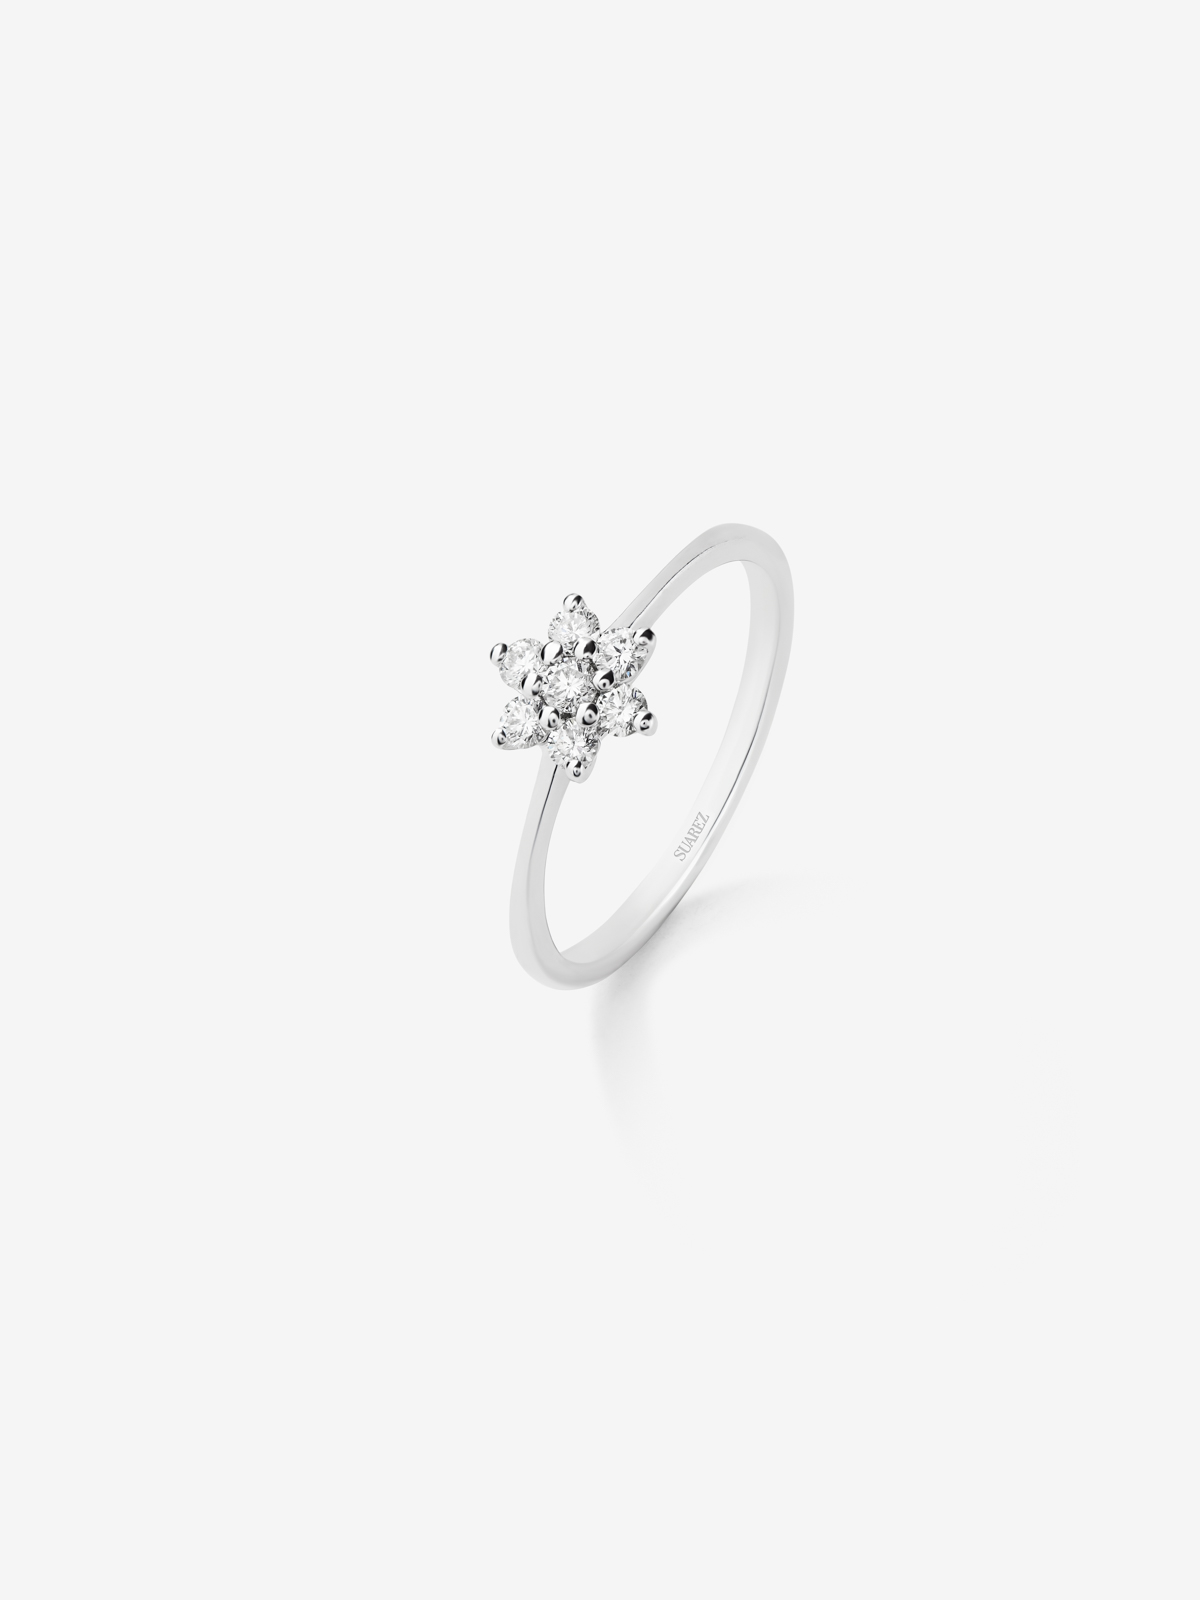 18K white gold ring with diamonds in bright 0.24 CTS star -shaped